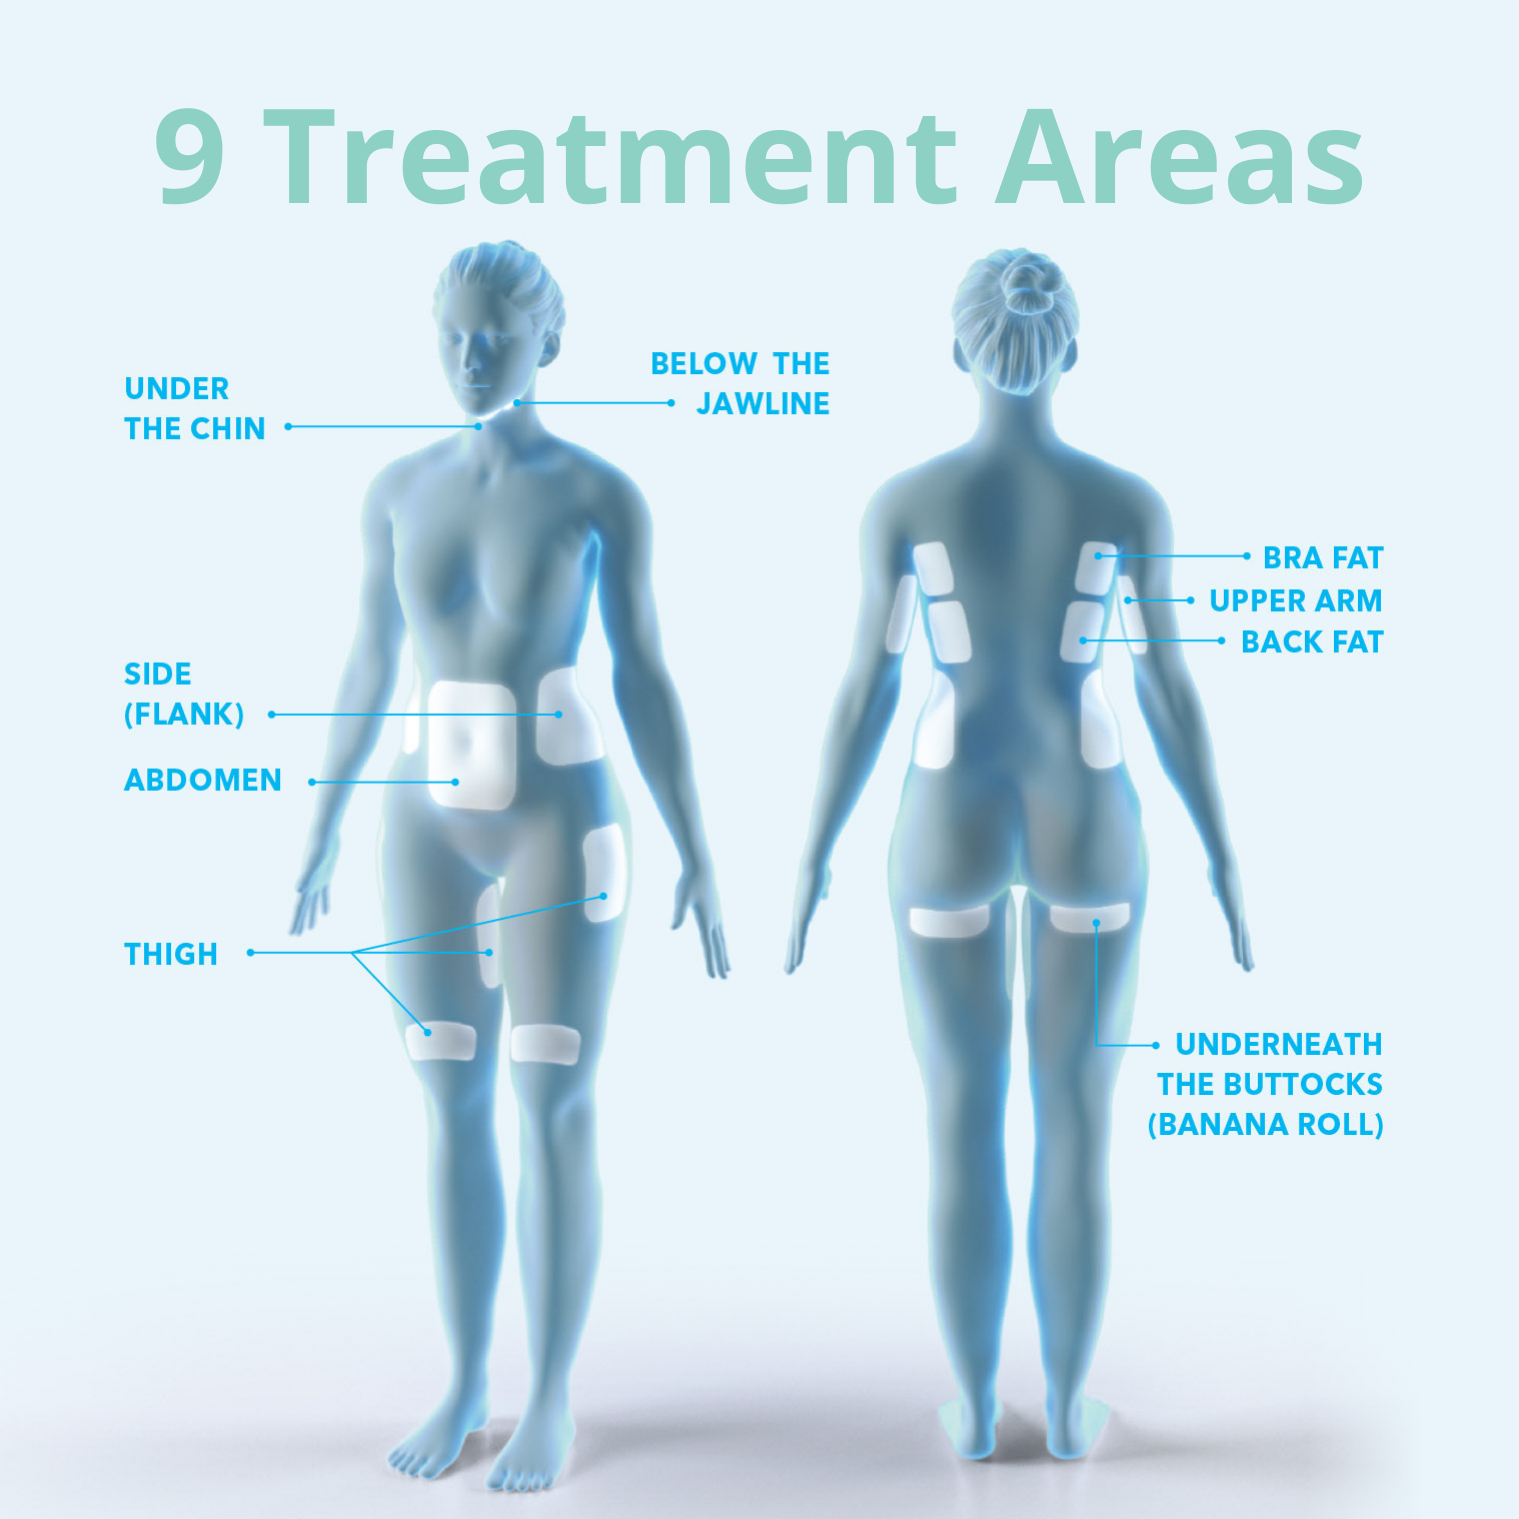 Freeze the Fat in 9 treatment areas